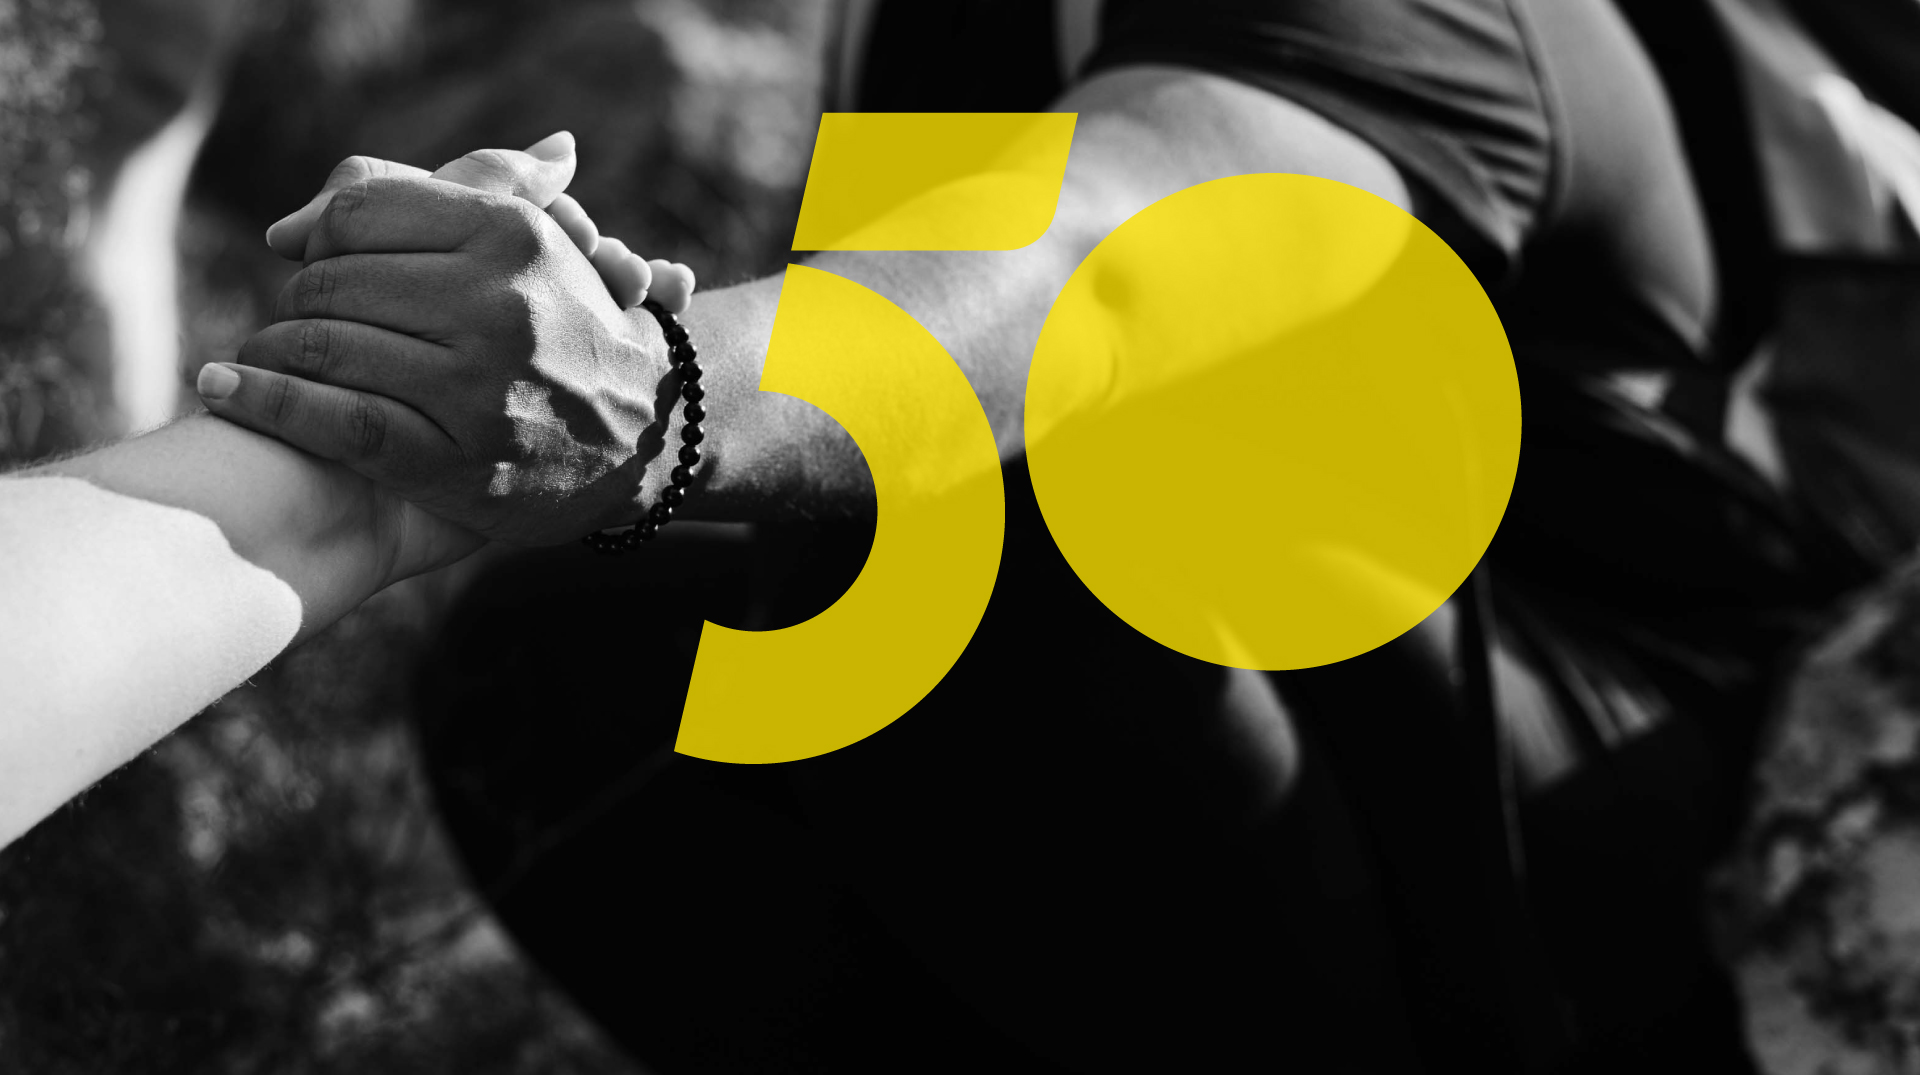 Commemorative montage for Machado Meyer's 50th birthday. Image with a handshake of two people on a white and black background and in the center the numbers 5 and 0 stylized in yellow, and the slogan Opening paths